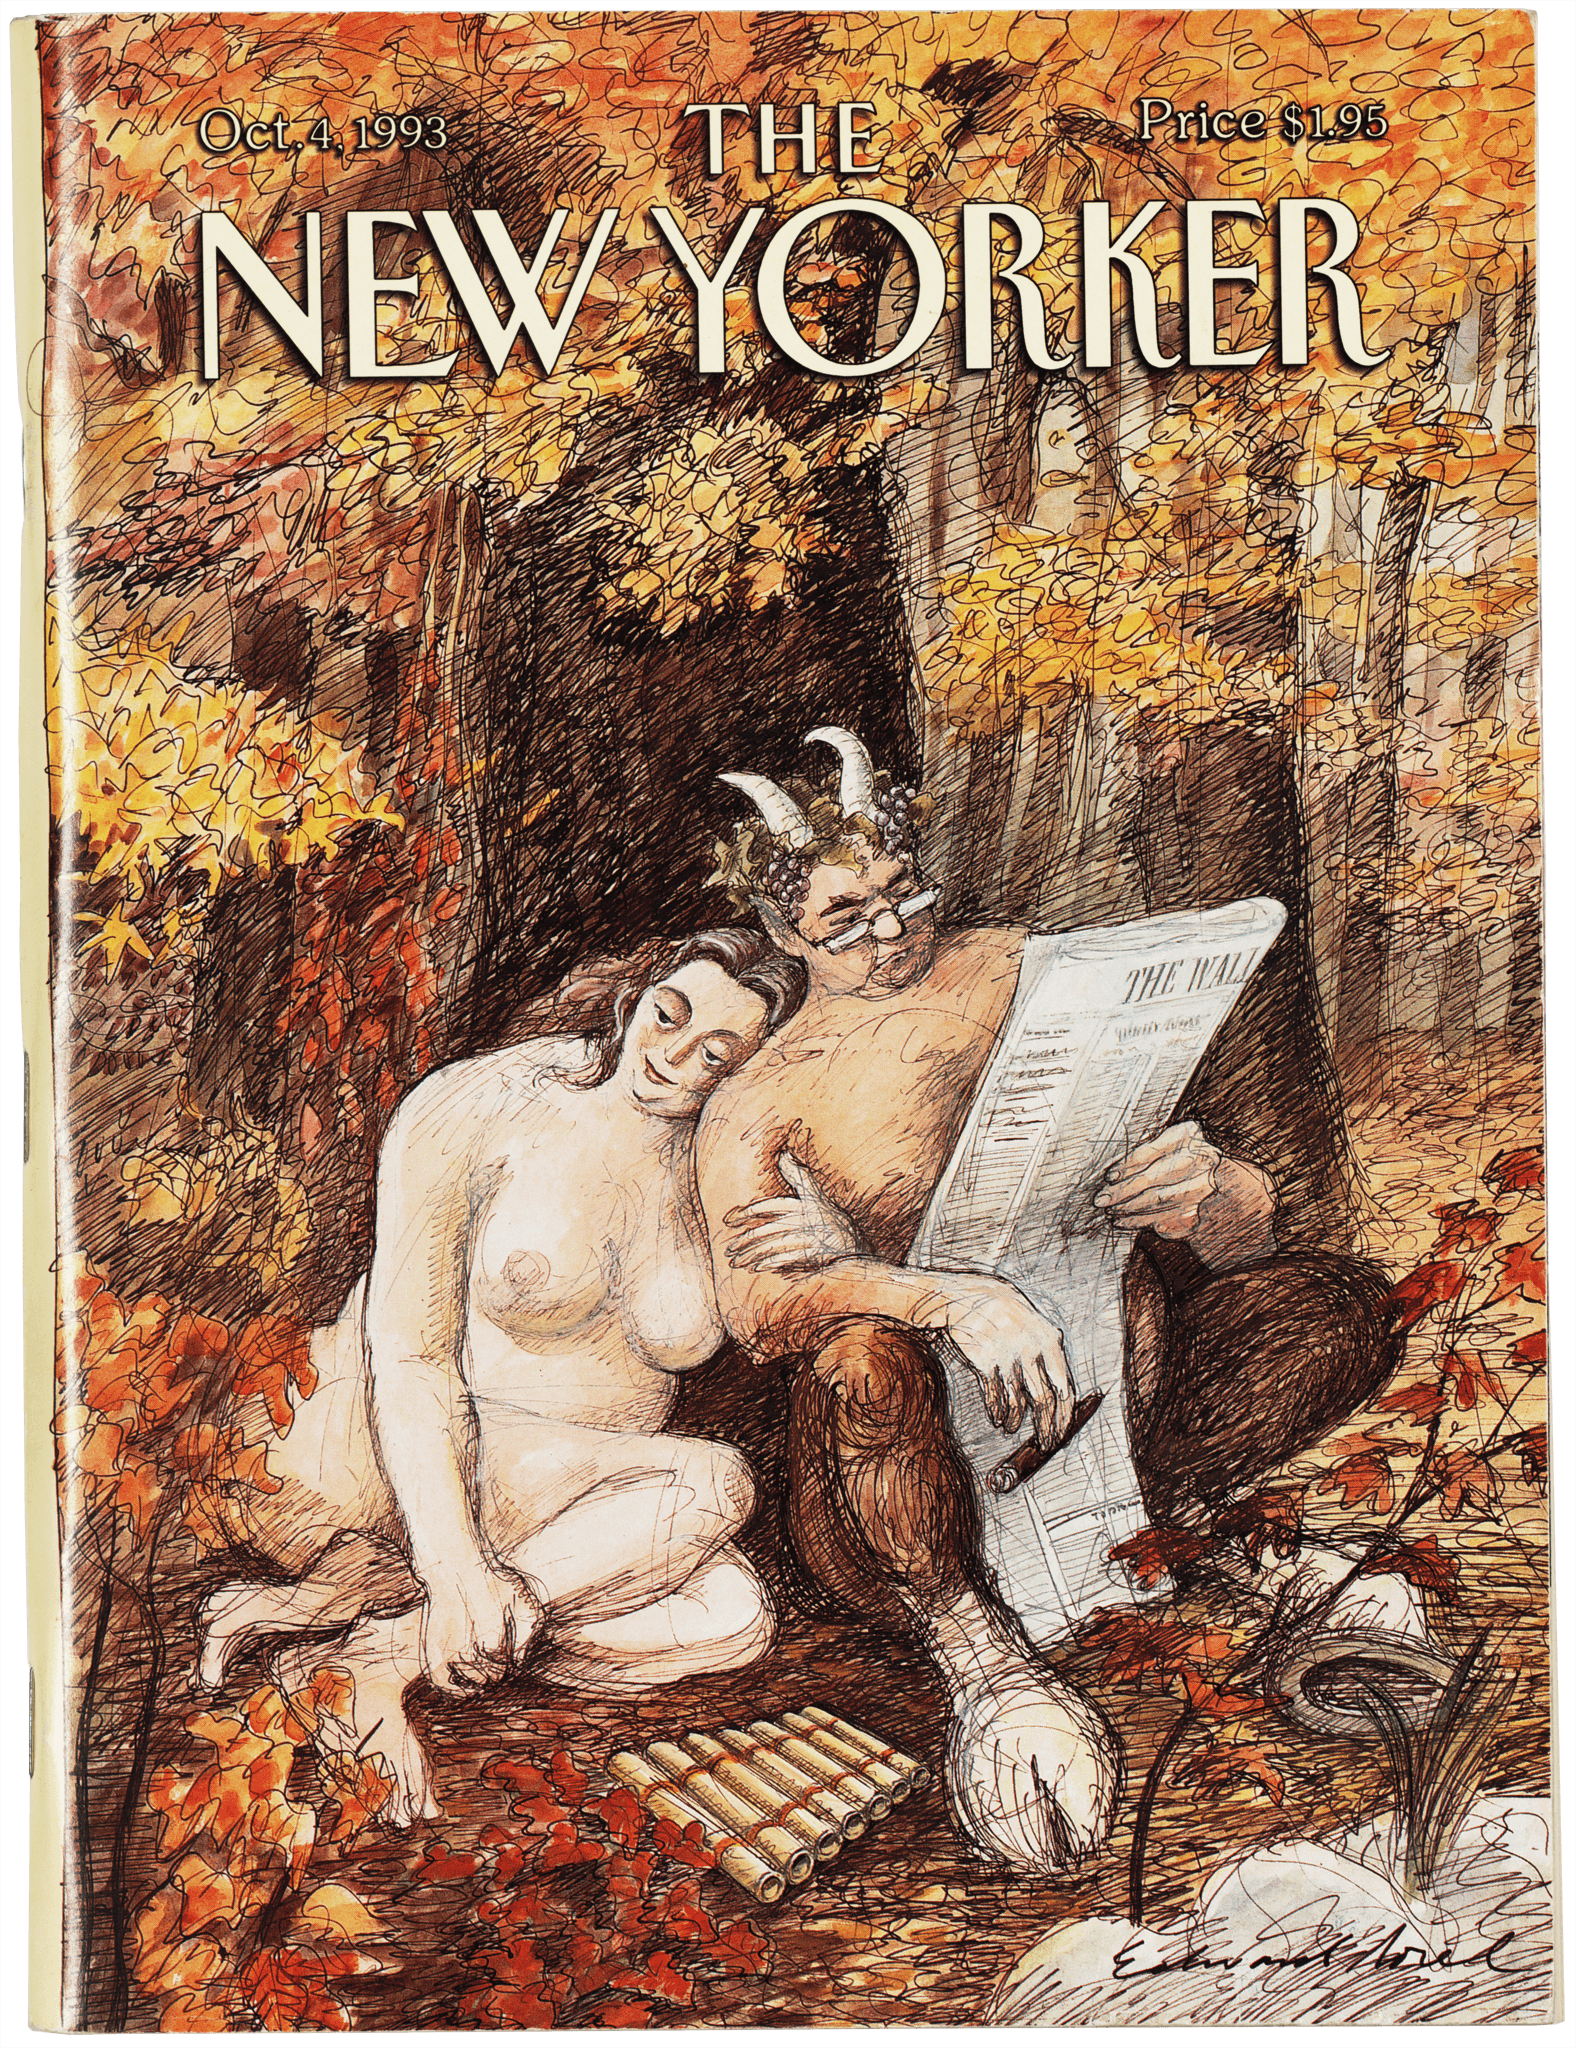 NewYorker-Oct4-1993-cover_Ap_Resized.png